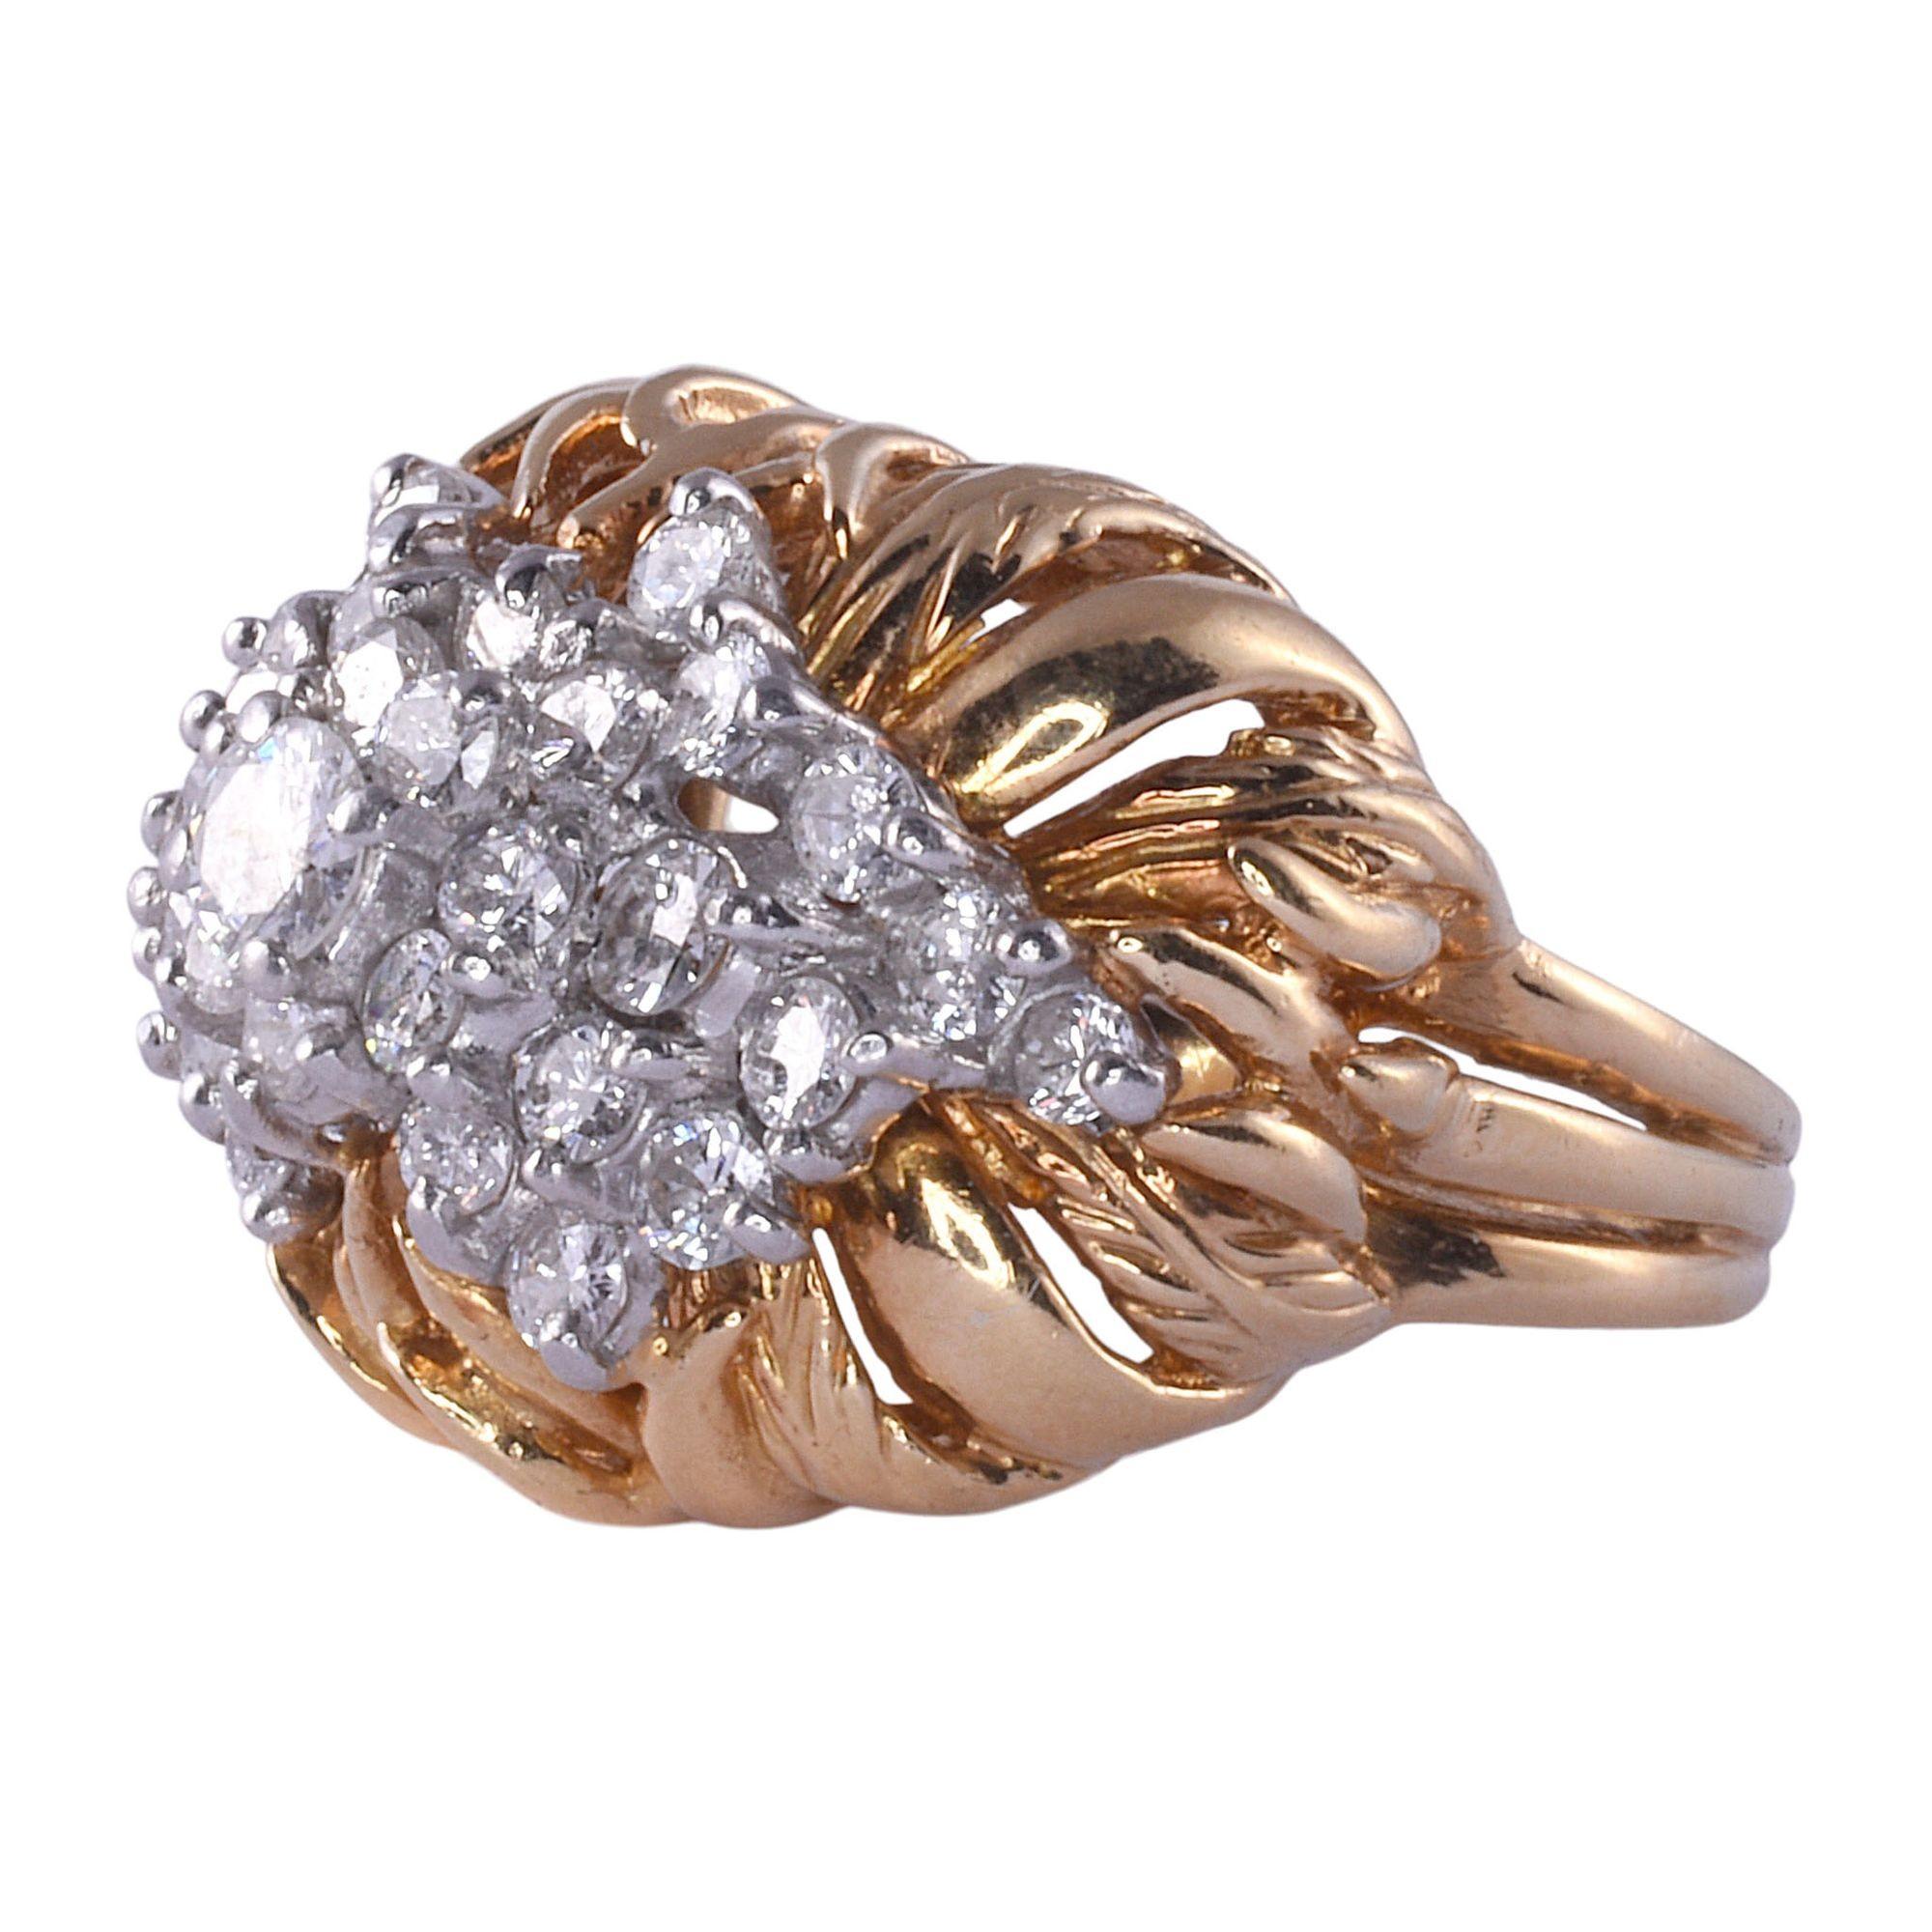 Vintage two tone 18K gold diamond cluster ring, circa 1960. This vintage ring is crafted in 18 karat yellow gold and 18 karat white gold. It features a cluster of diamonds at 1.35 carat total weight with VS clarity and F-H color. This vintage